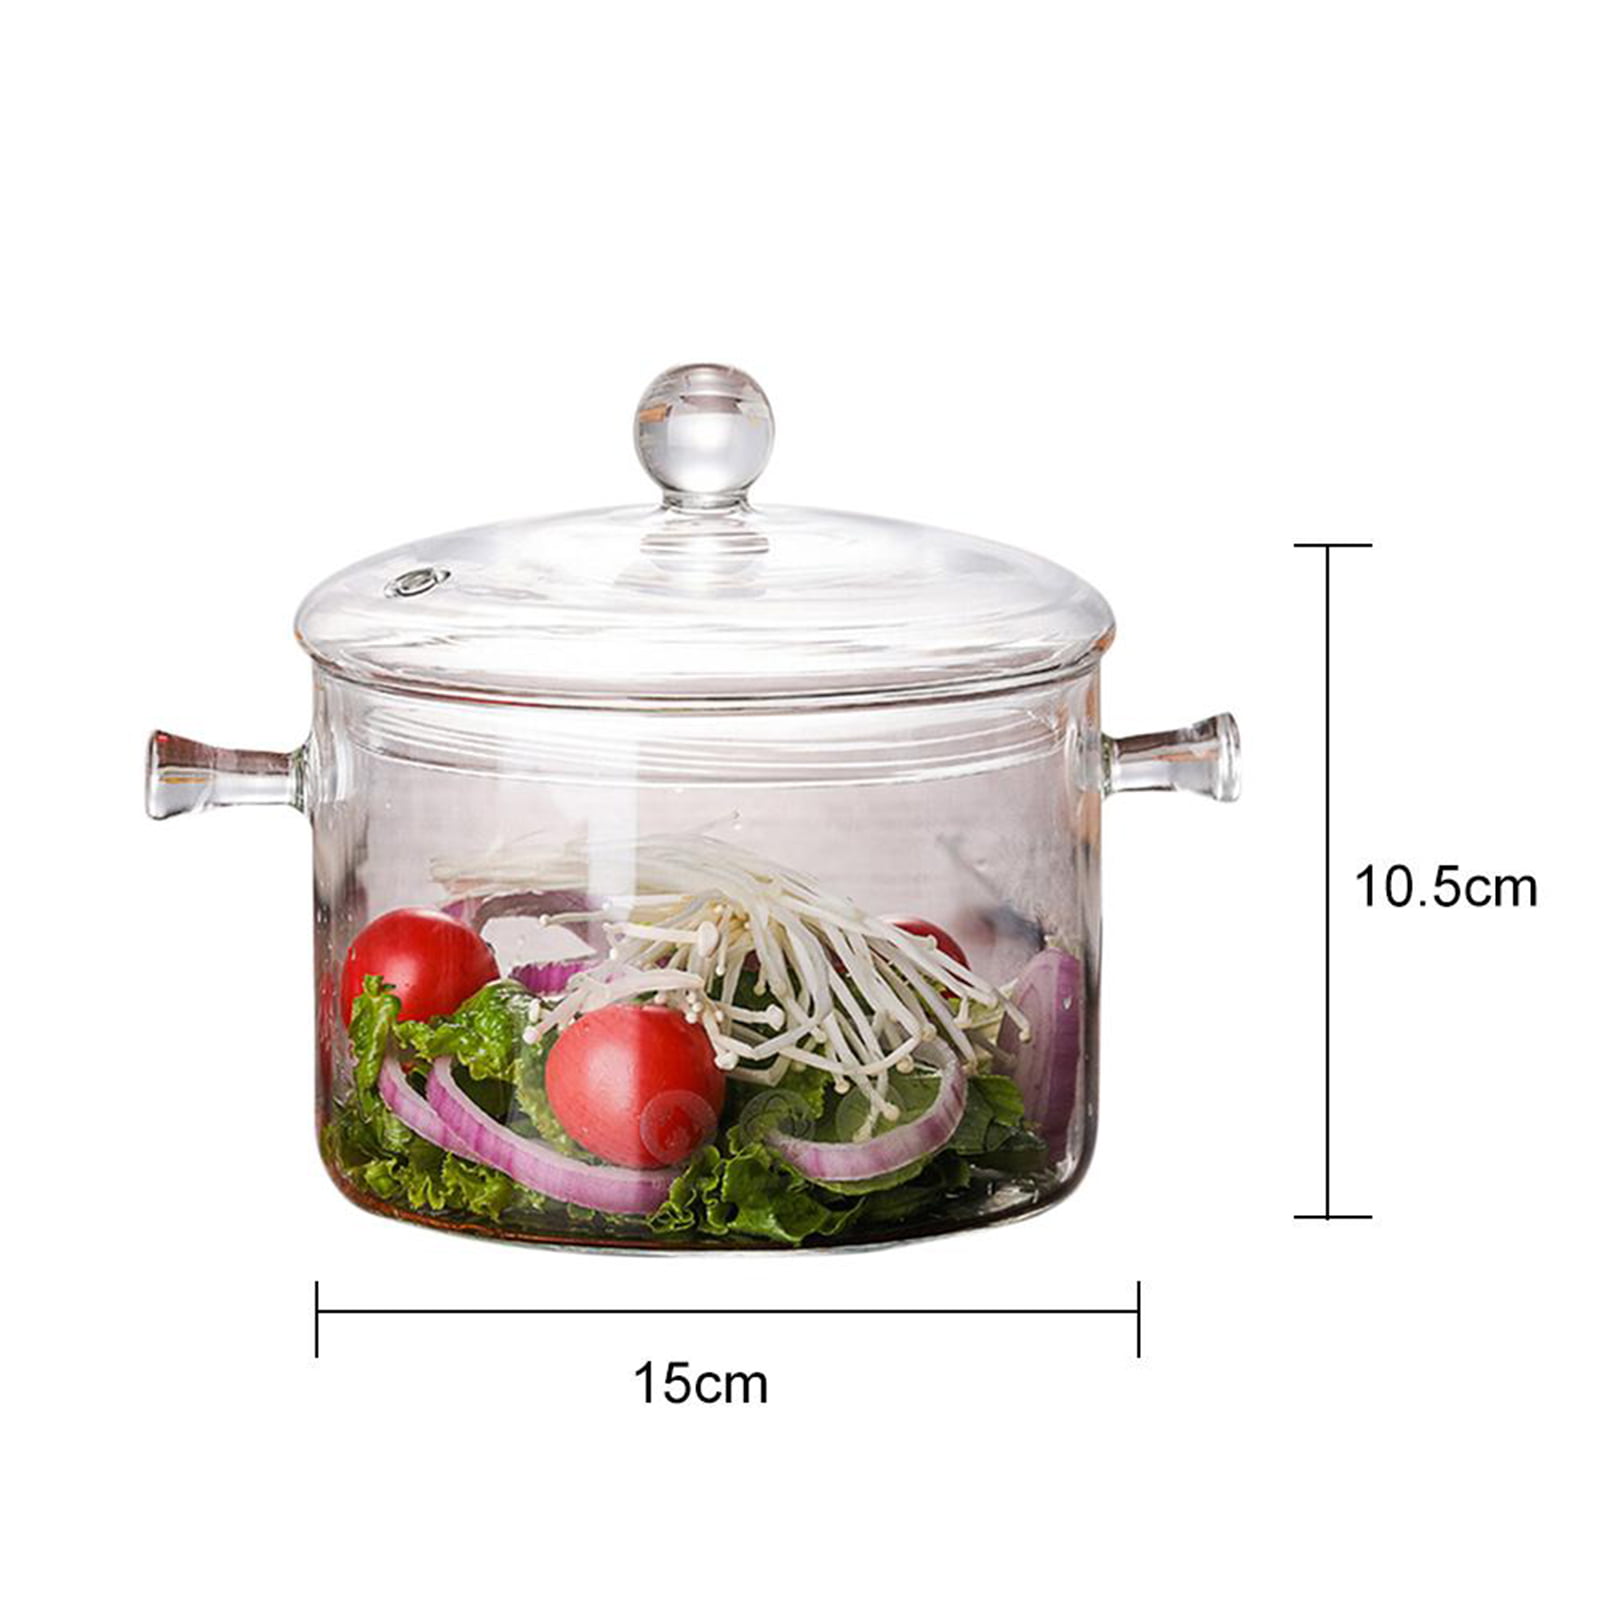 Small Glass Saucepan Heat Resistant Pot for Cooking with Lid and Handle  Transparent Tremella Milk Soup Stew Pot Kitchen Cookware